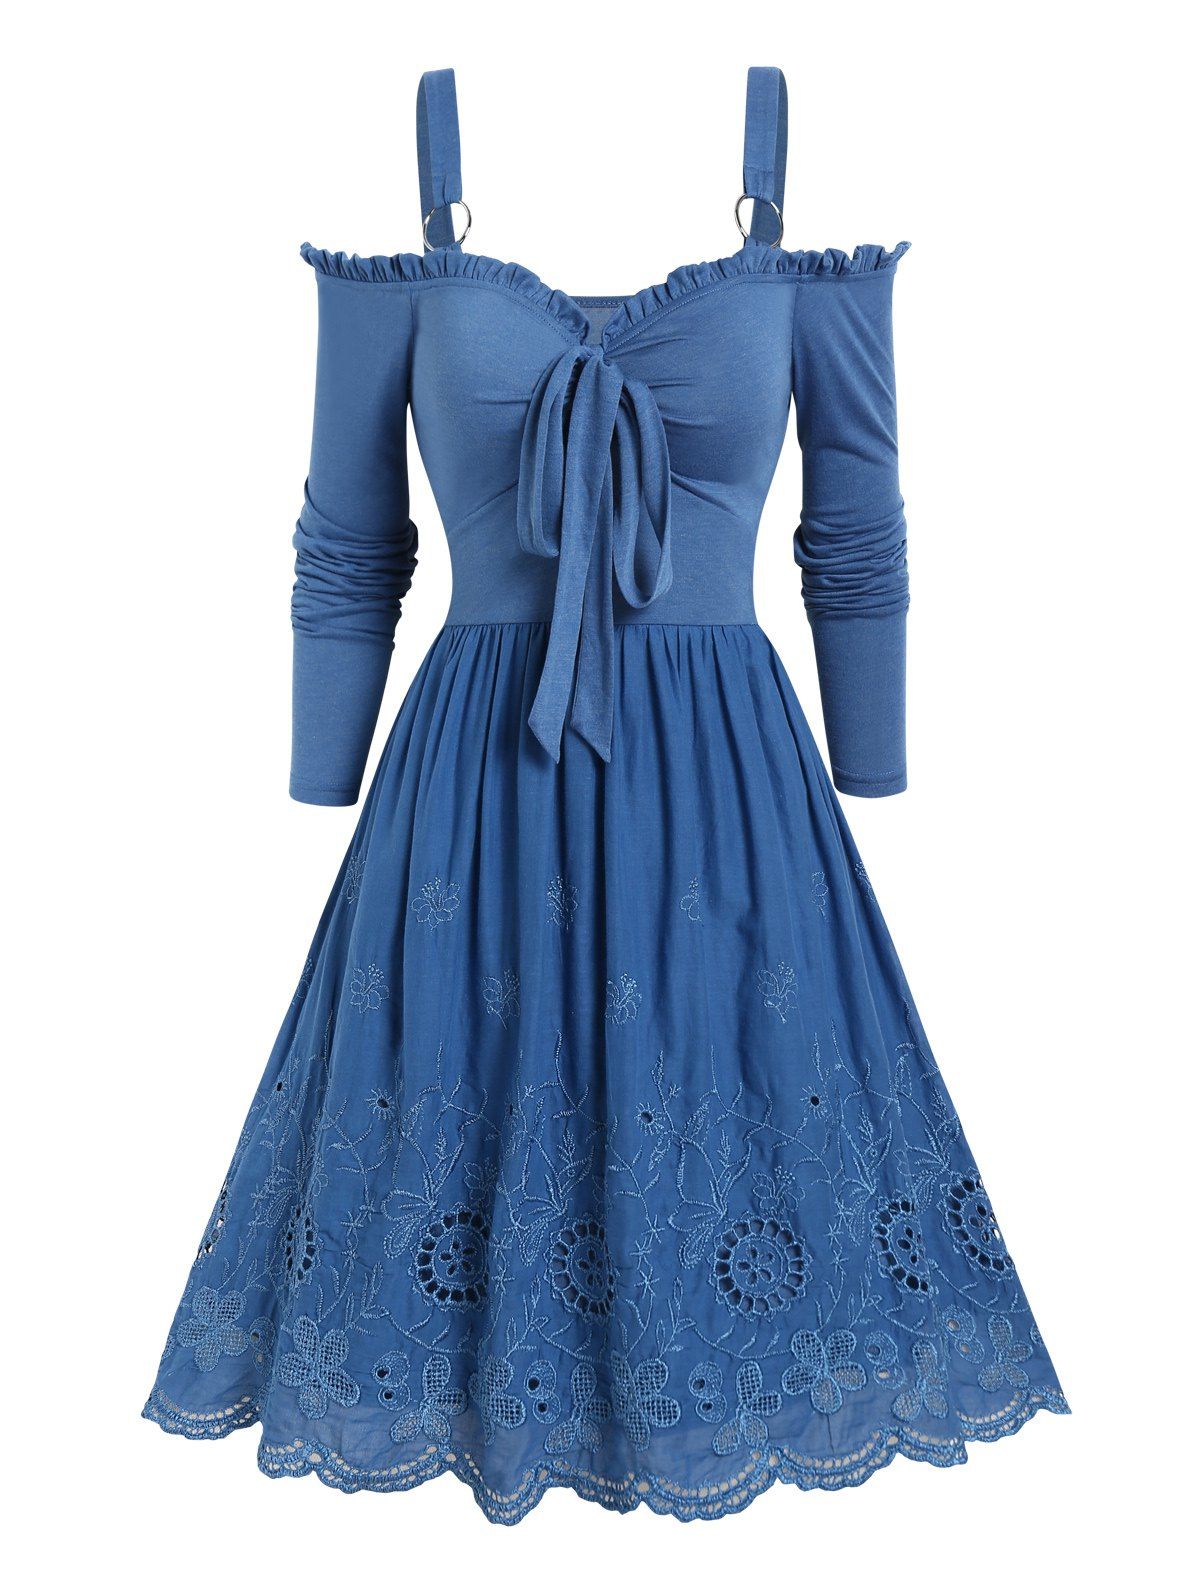 Cold Shoulder Long Sleeve Dress Hollow Out Floral Embroidery Bowknot Ruffles O Ring A Line Dress - DEEP BLUE XXXL